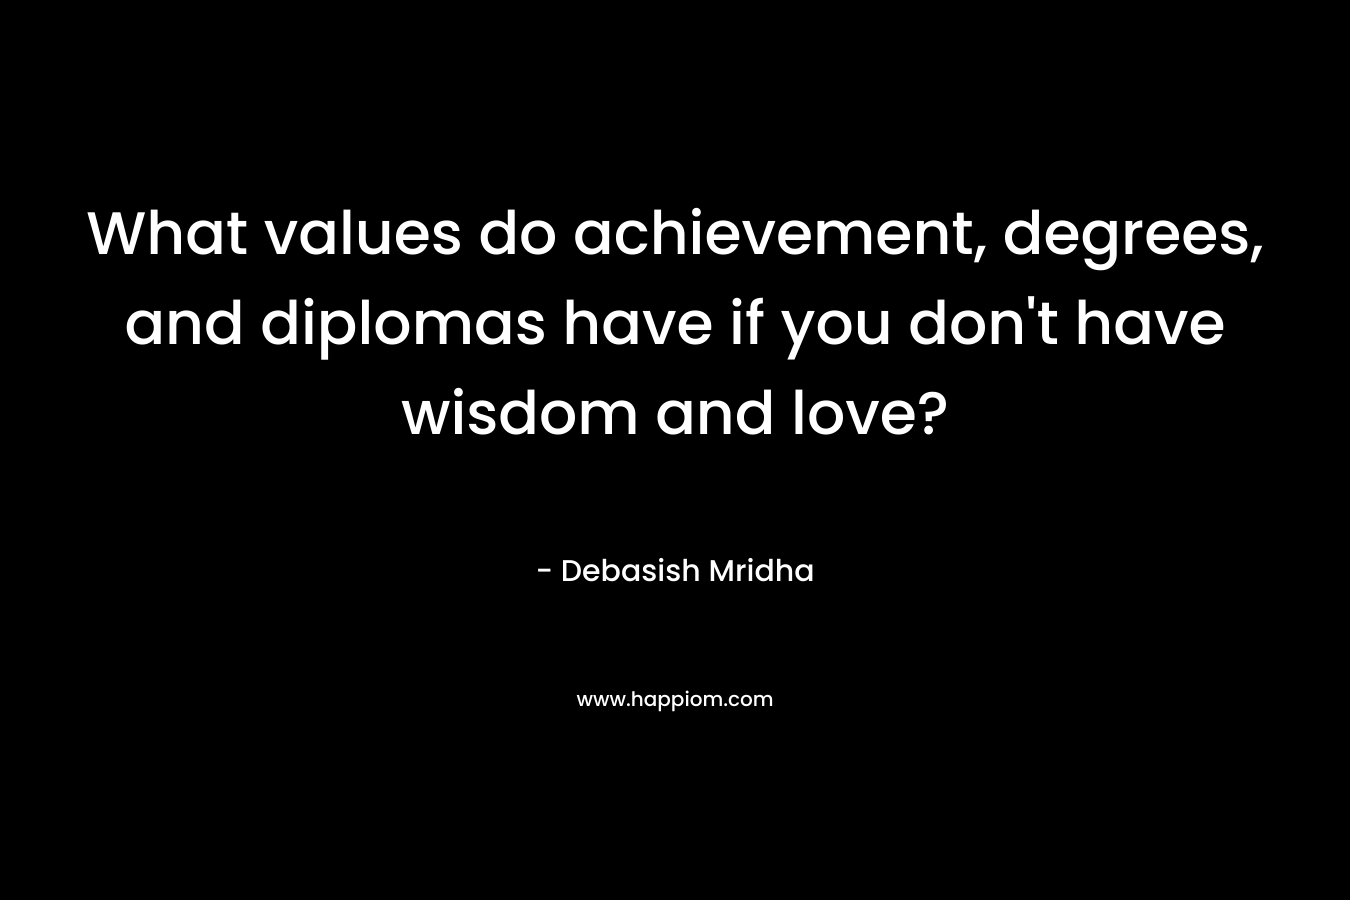 What values do achievement, degrees, and diplomas have if you don’t have wisdom and love? – Debasish Mridha